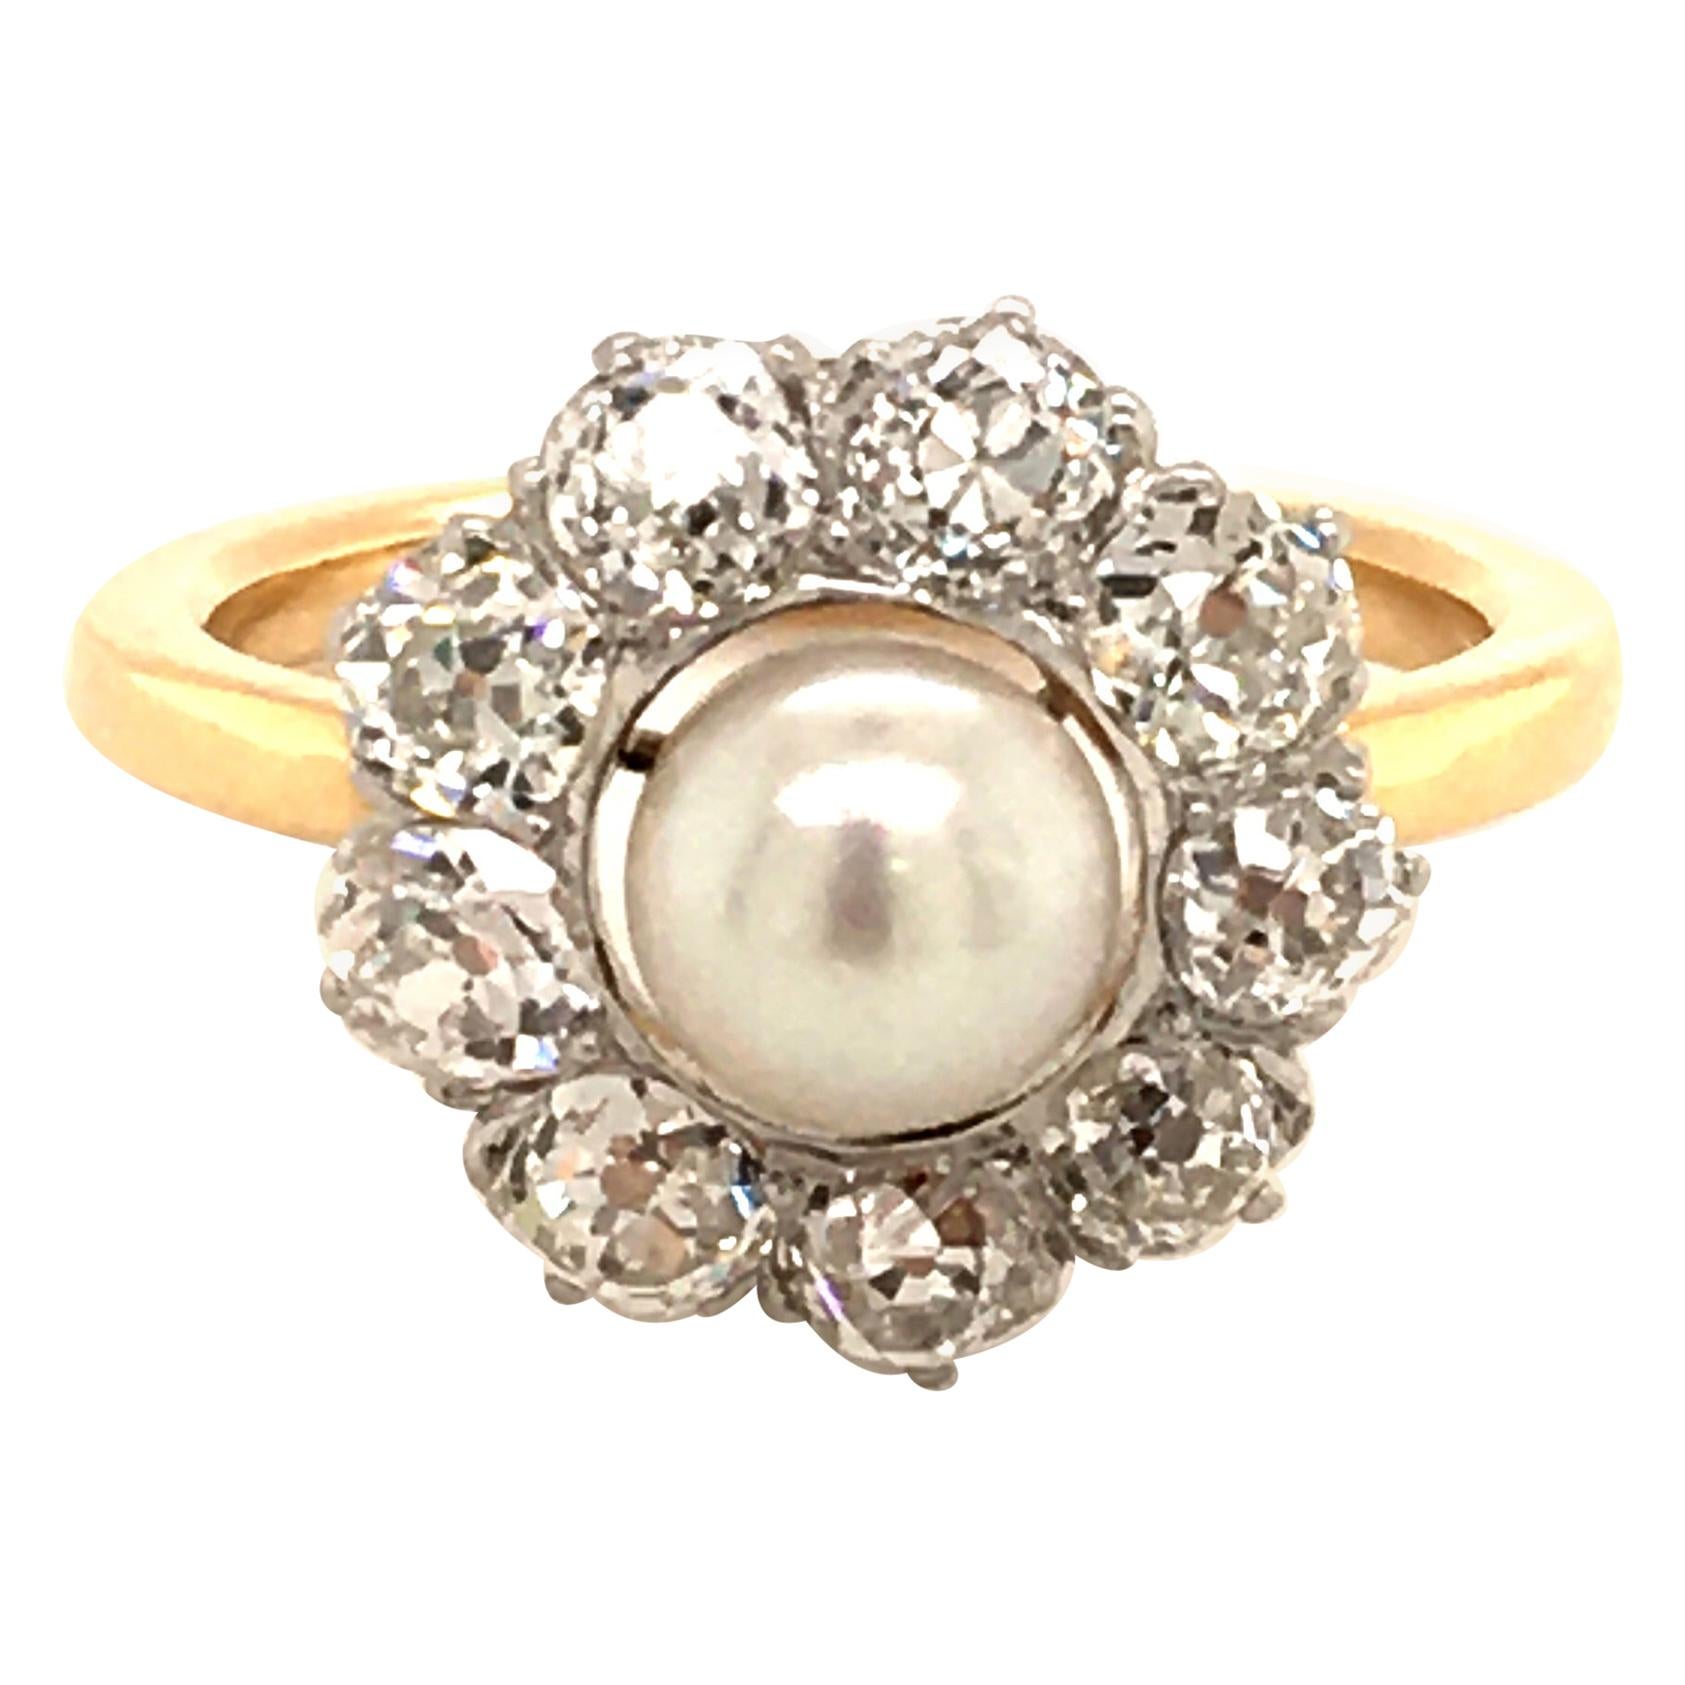 Gold Ring Set with a Natural Pearl Surrounded by Oldcut-Diamonds